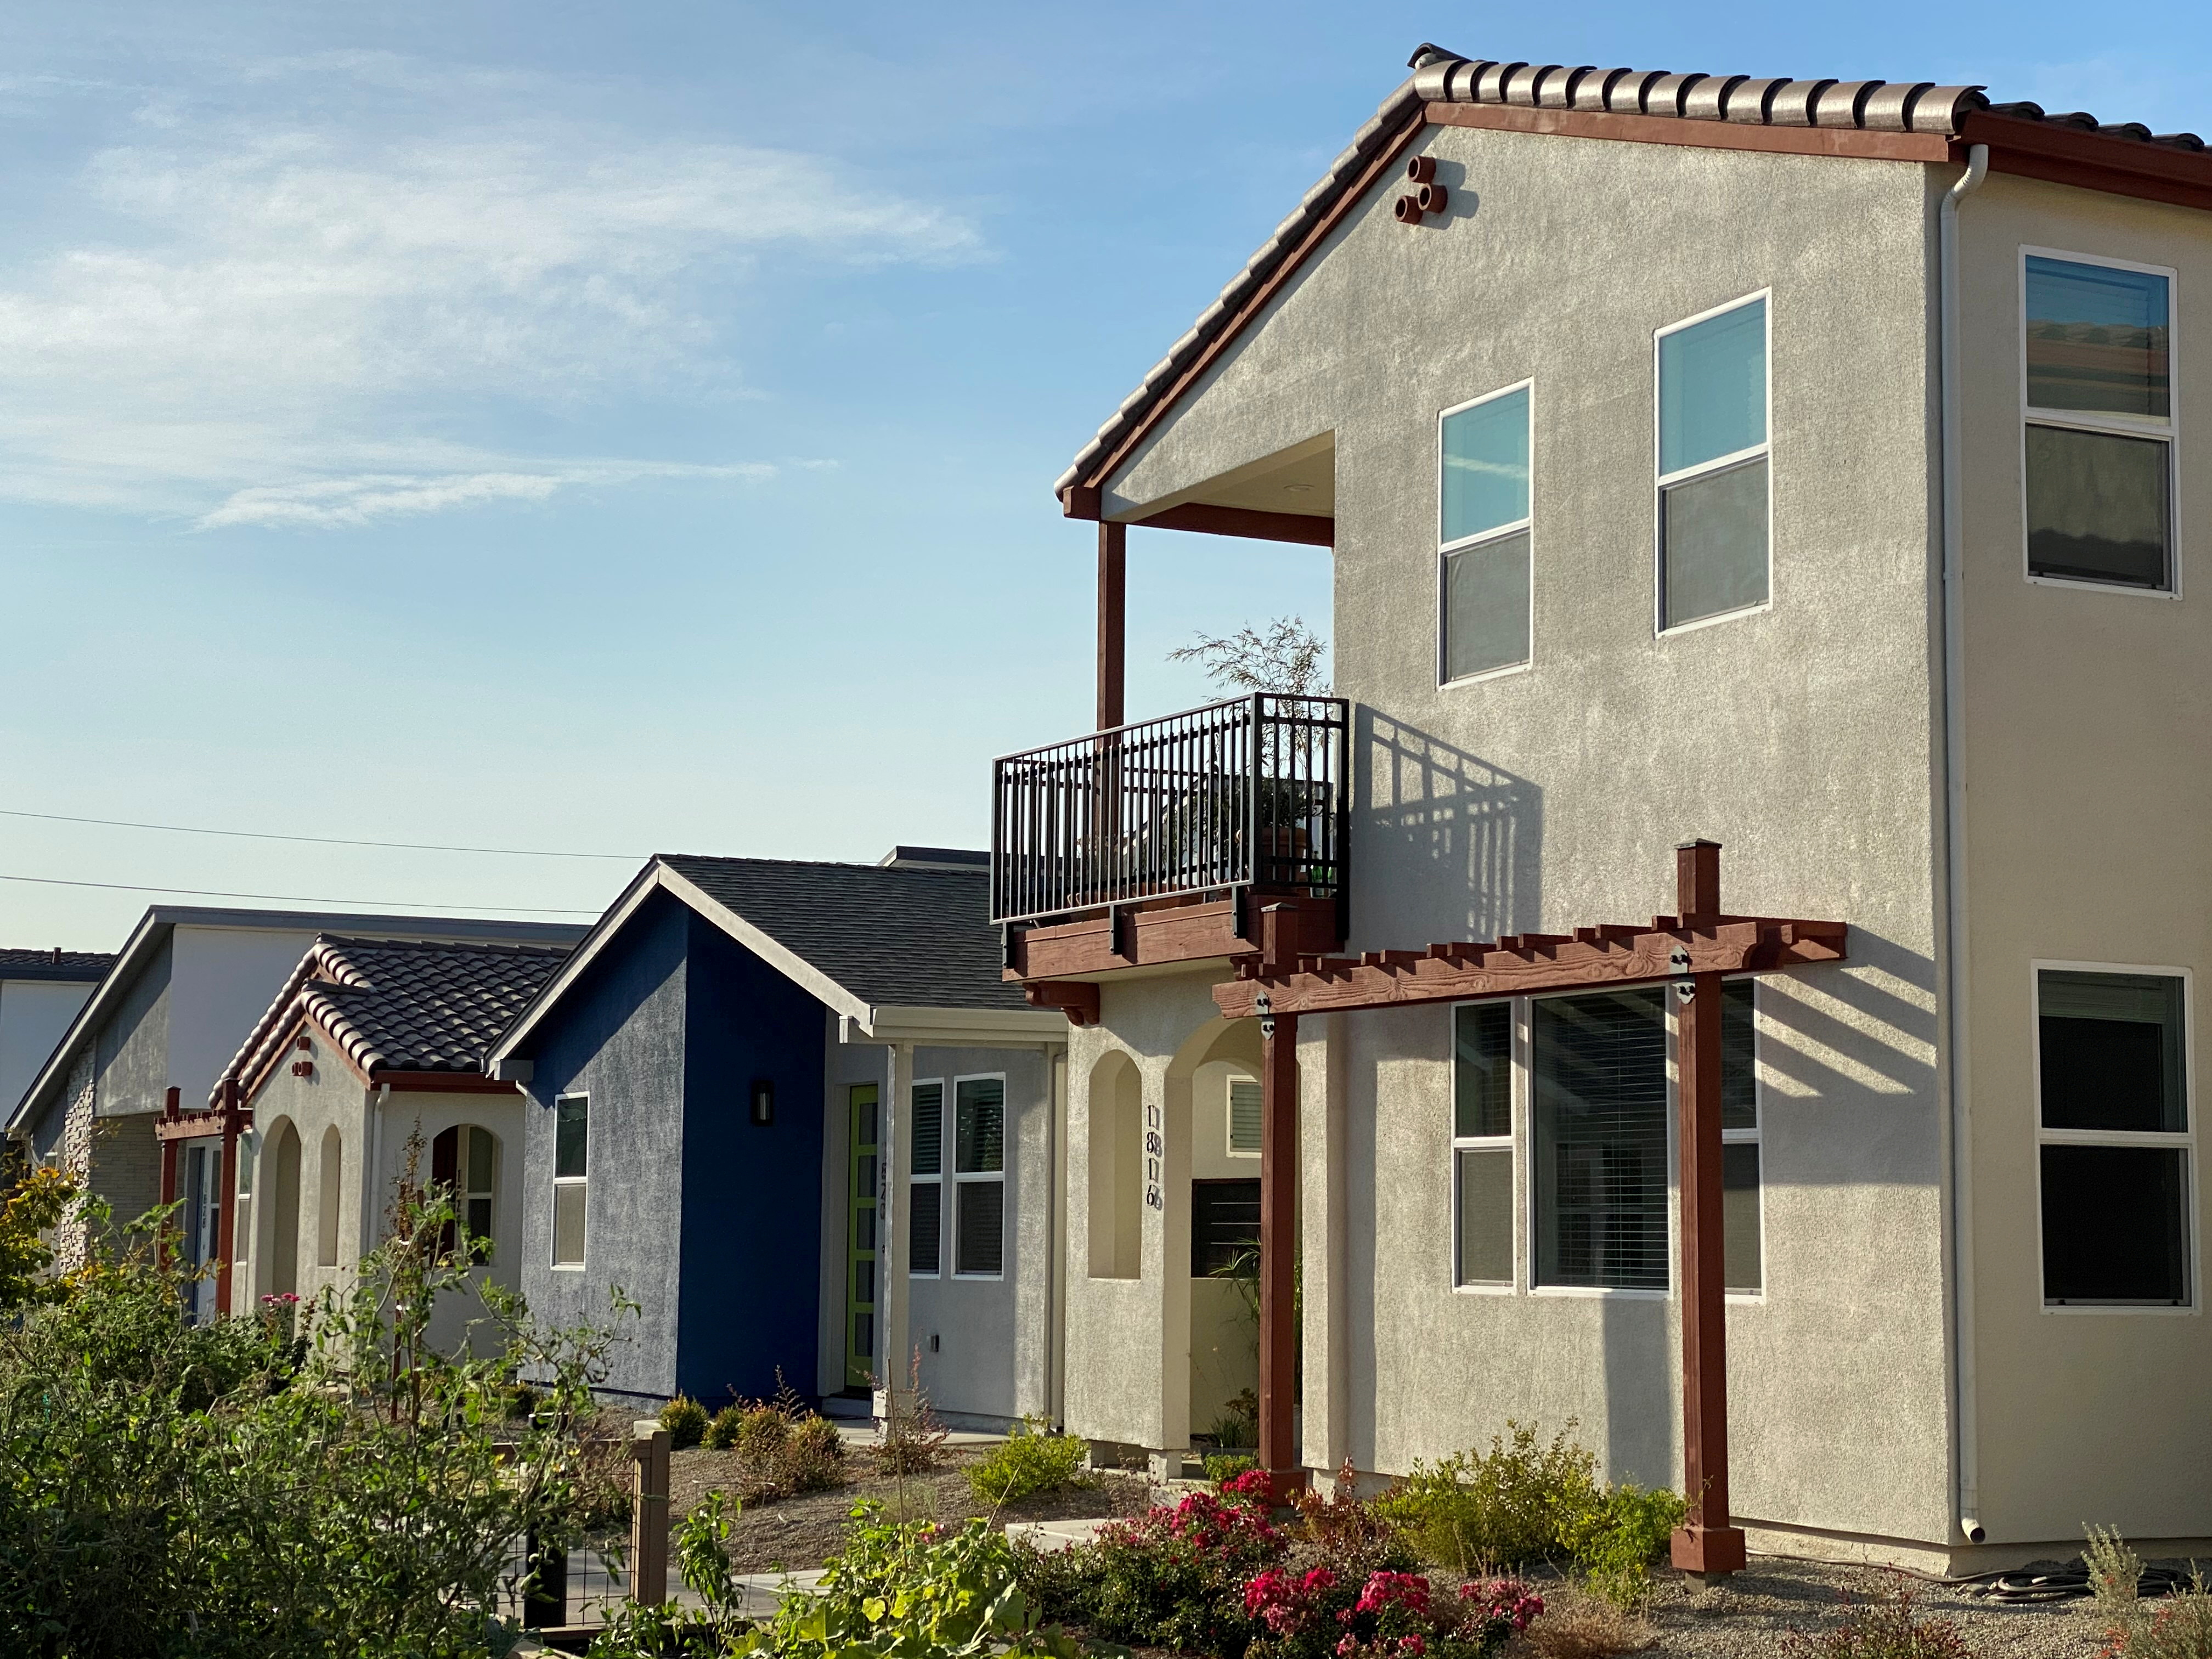 A view shows newly built houses in Chico, California